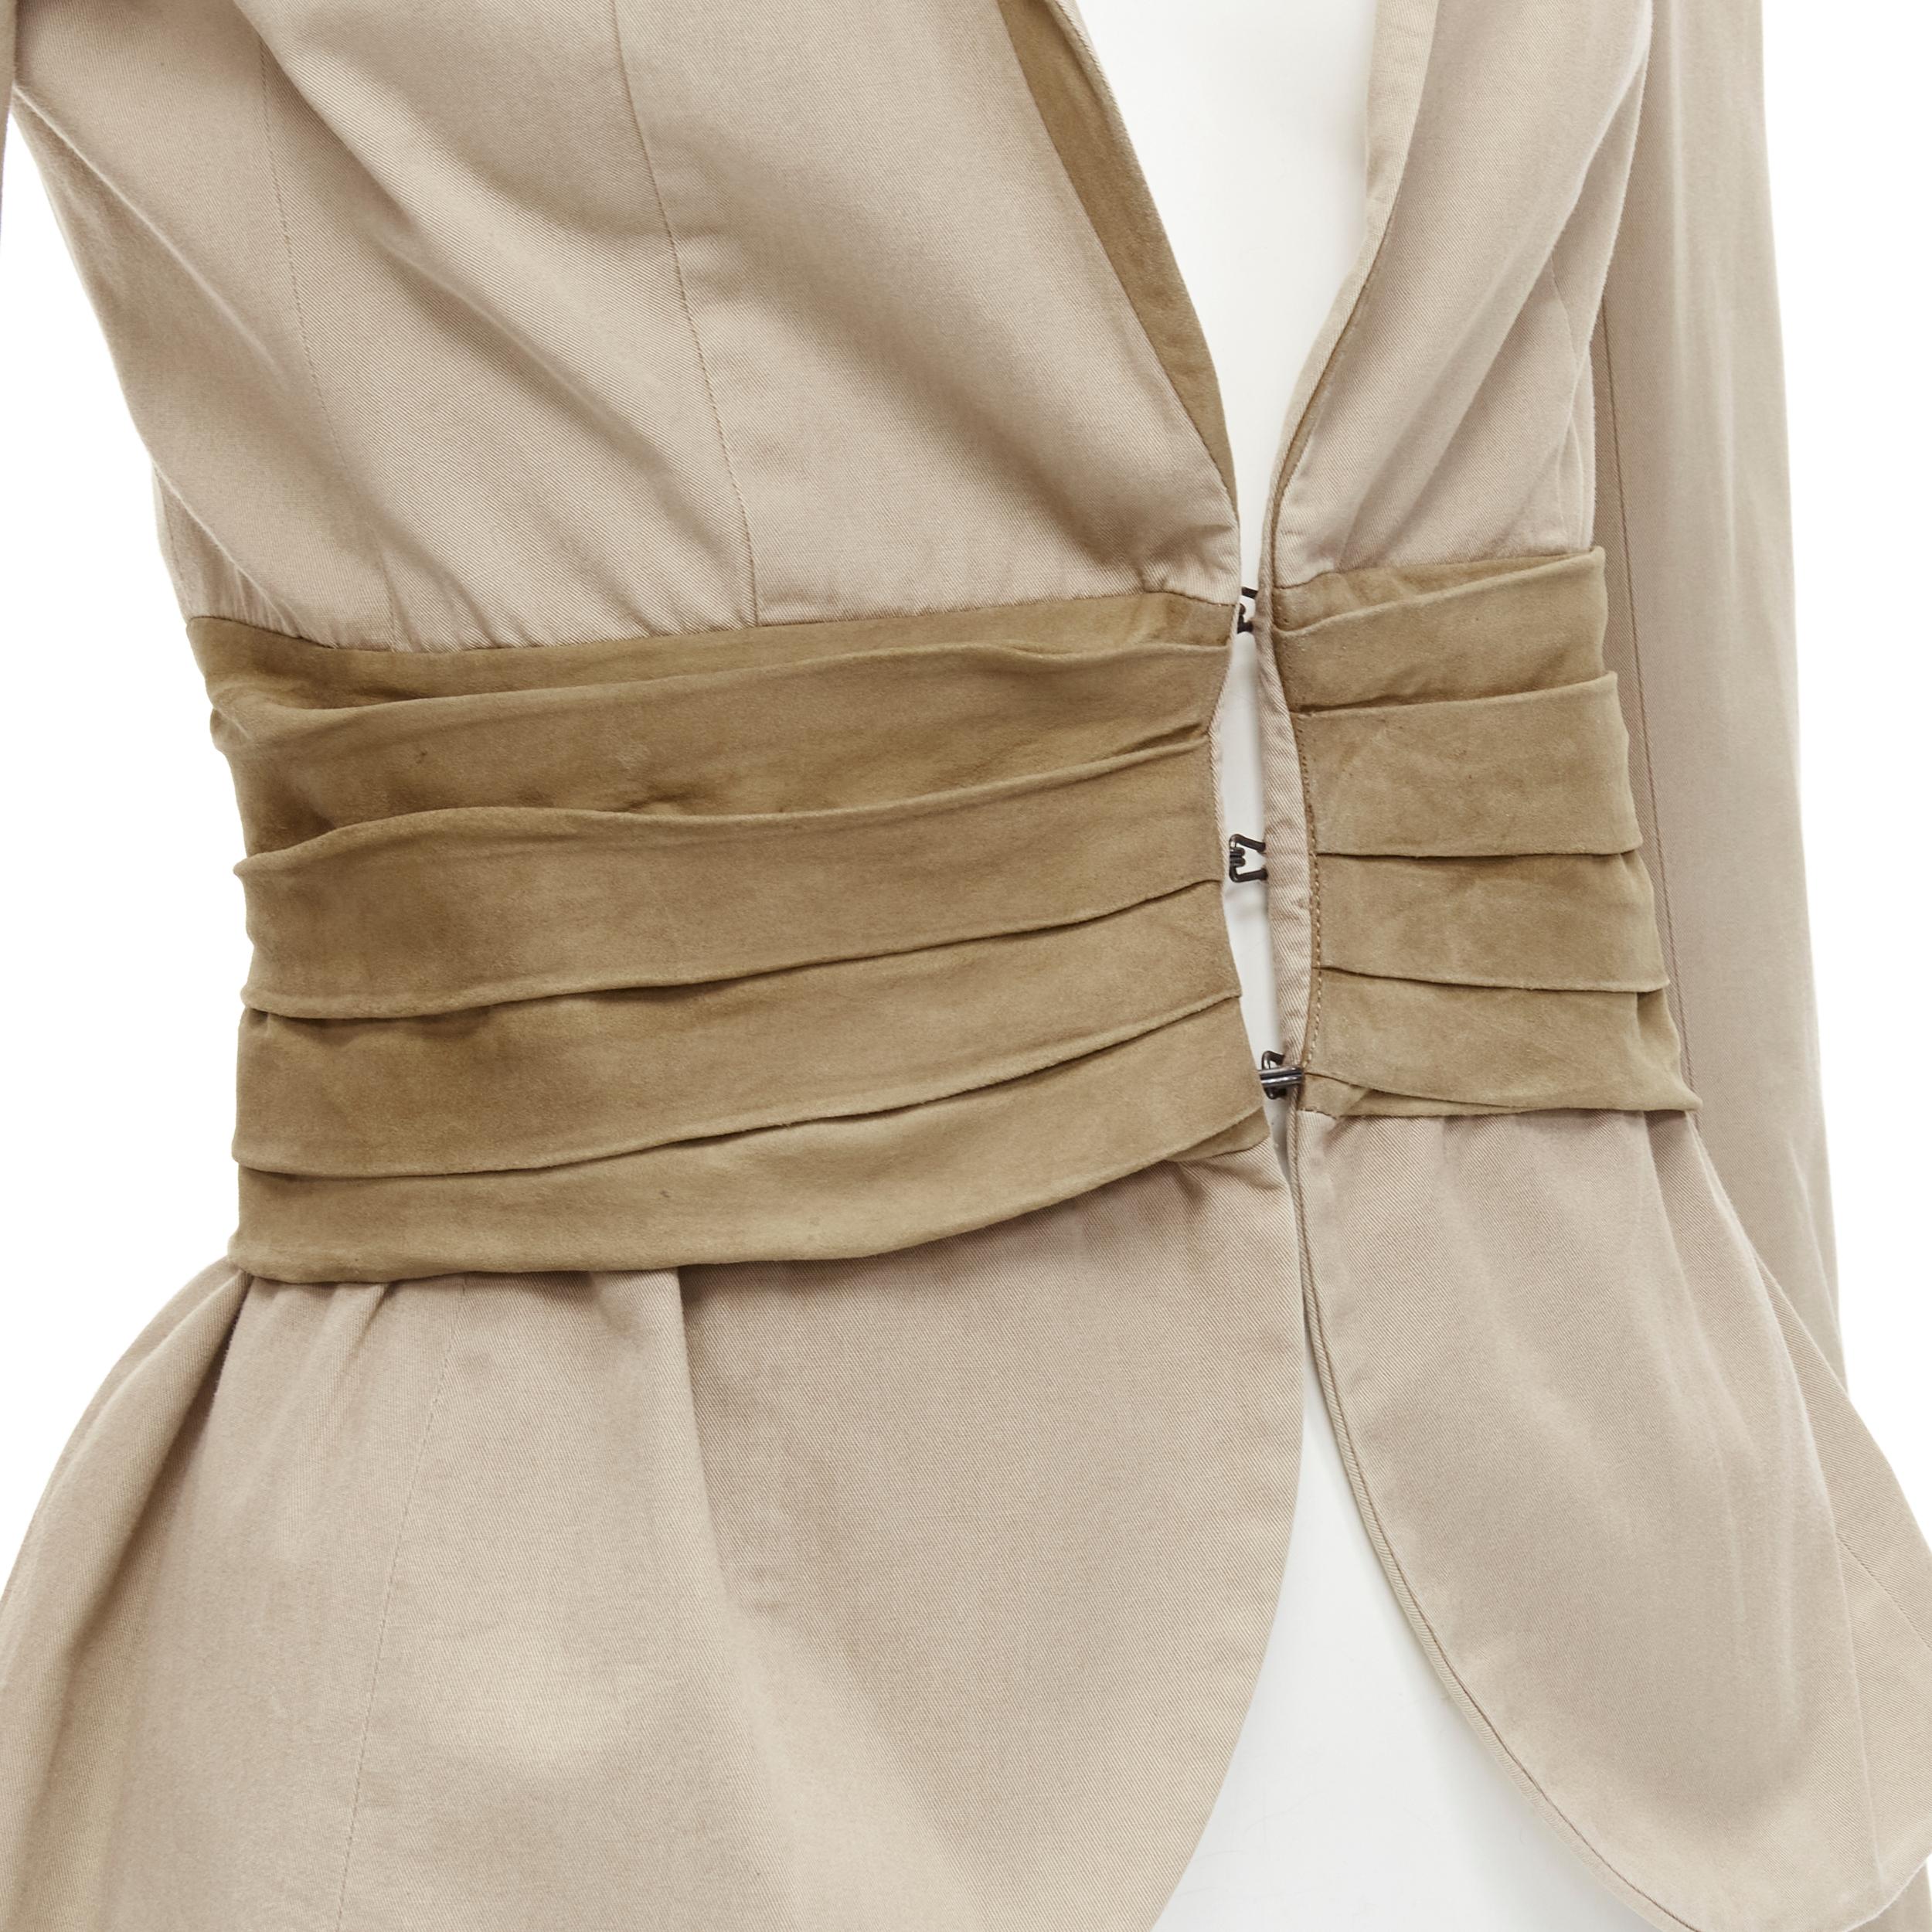 LES HOMMES Feminine beige cotton suede leather pleated belt blazer FR38 S 
Reference: JACG/A00037 
Brand: Les Hommes 
Material: Cotton 
Color: Beige 
Pattern: Solid 
Closure: Hook & Eye 
Extra Detail: Pleated suede leather belt cinches waist. Padded